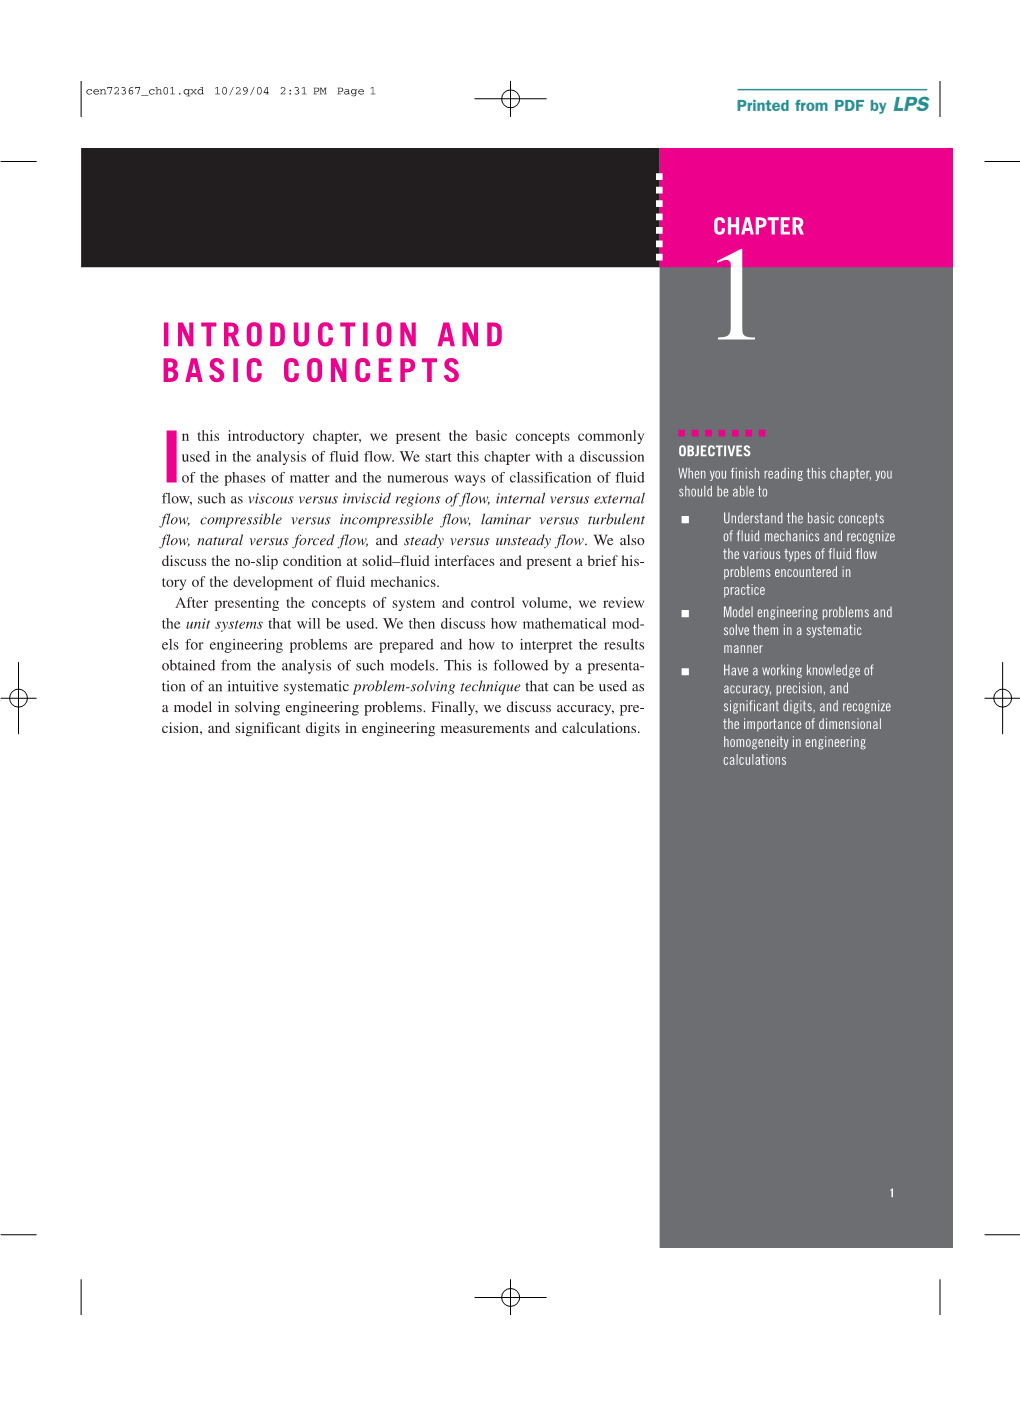 Introduction and Basic Concepts